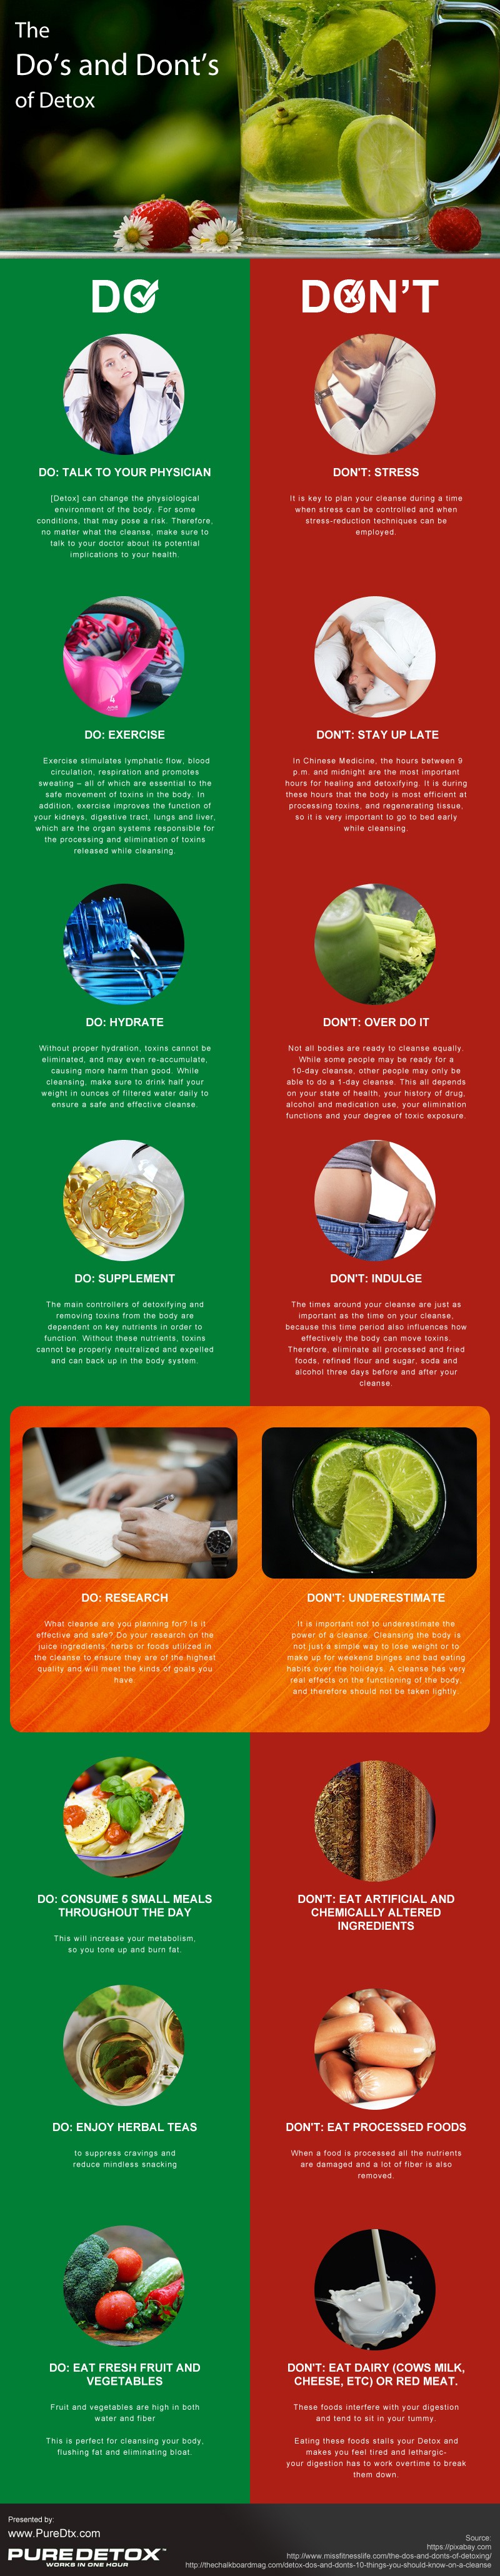 The Do's and Dont's of Detox